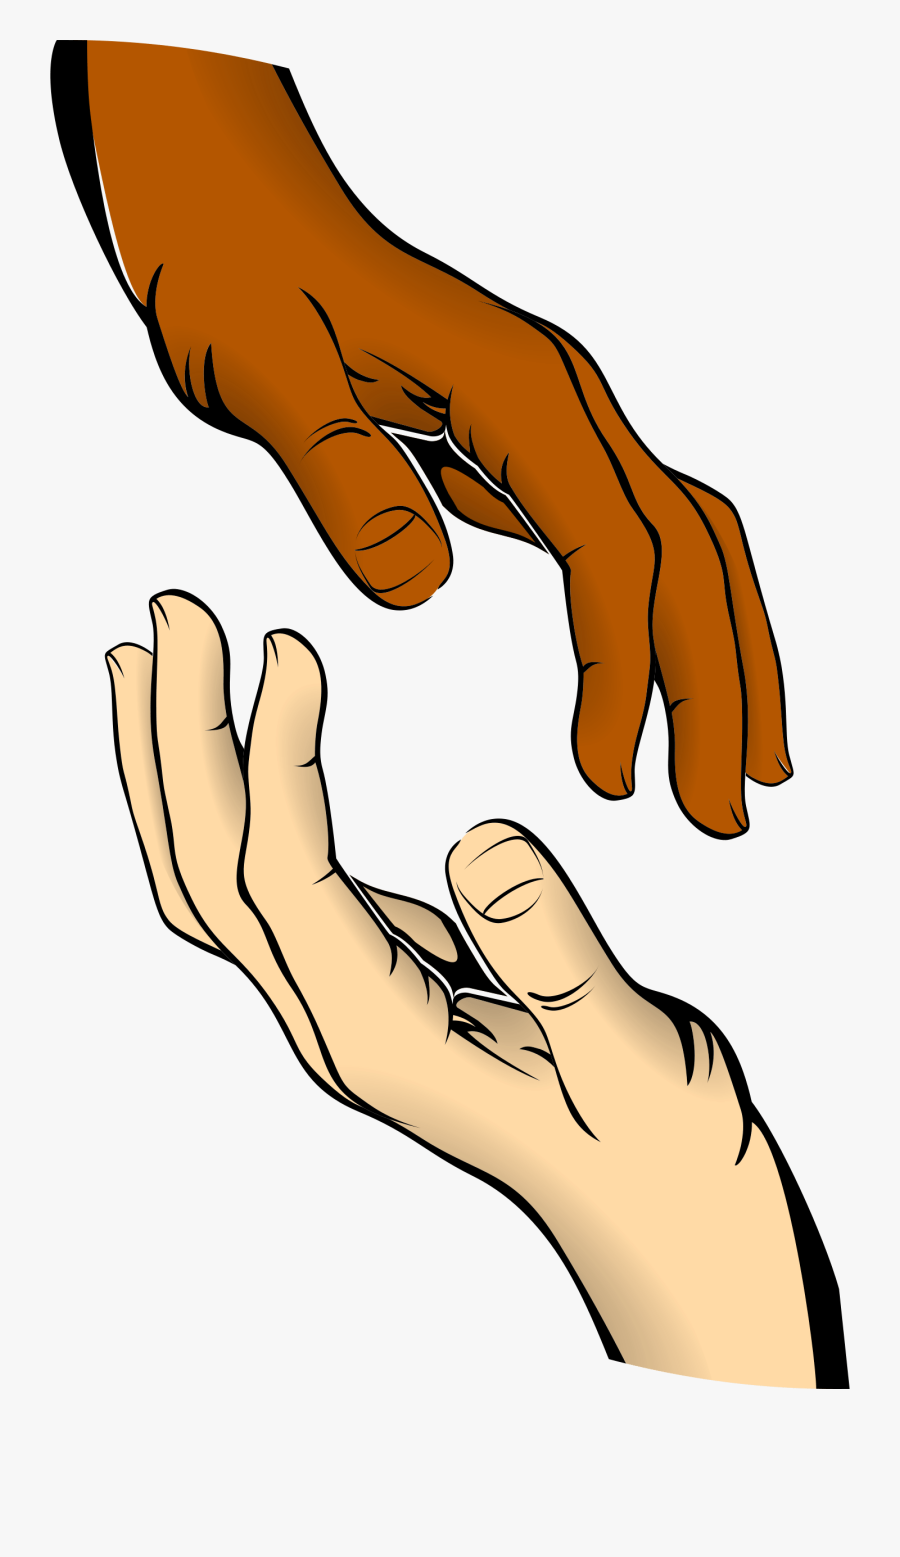 Helping Hand Clipart - Touching Hands Clipart, Transparent Clipart